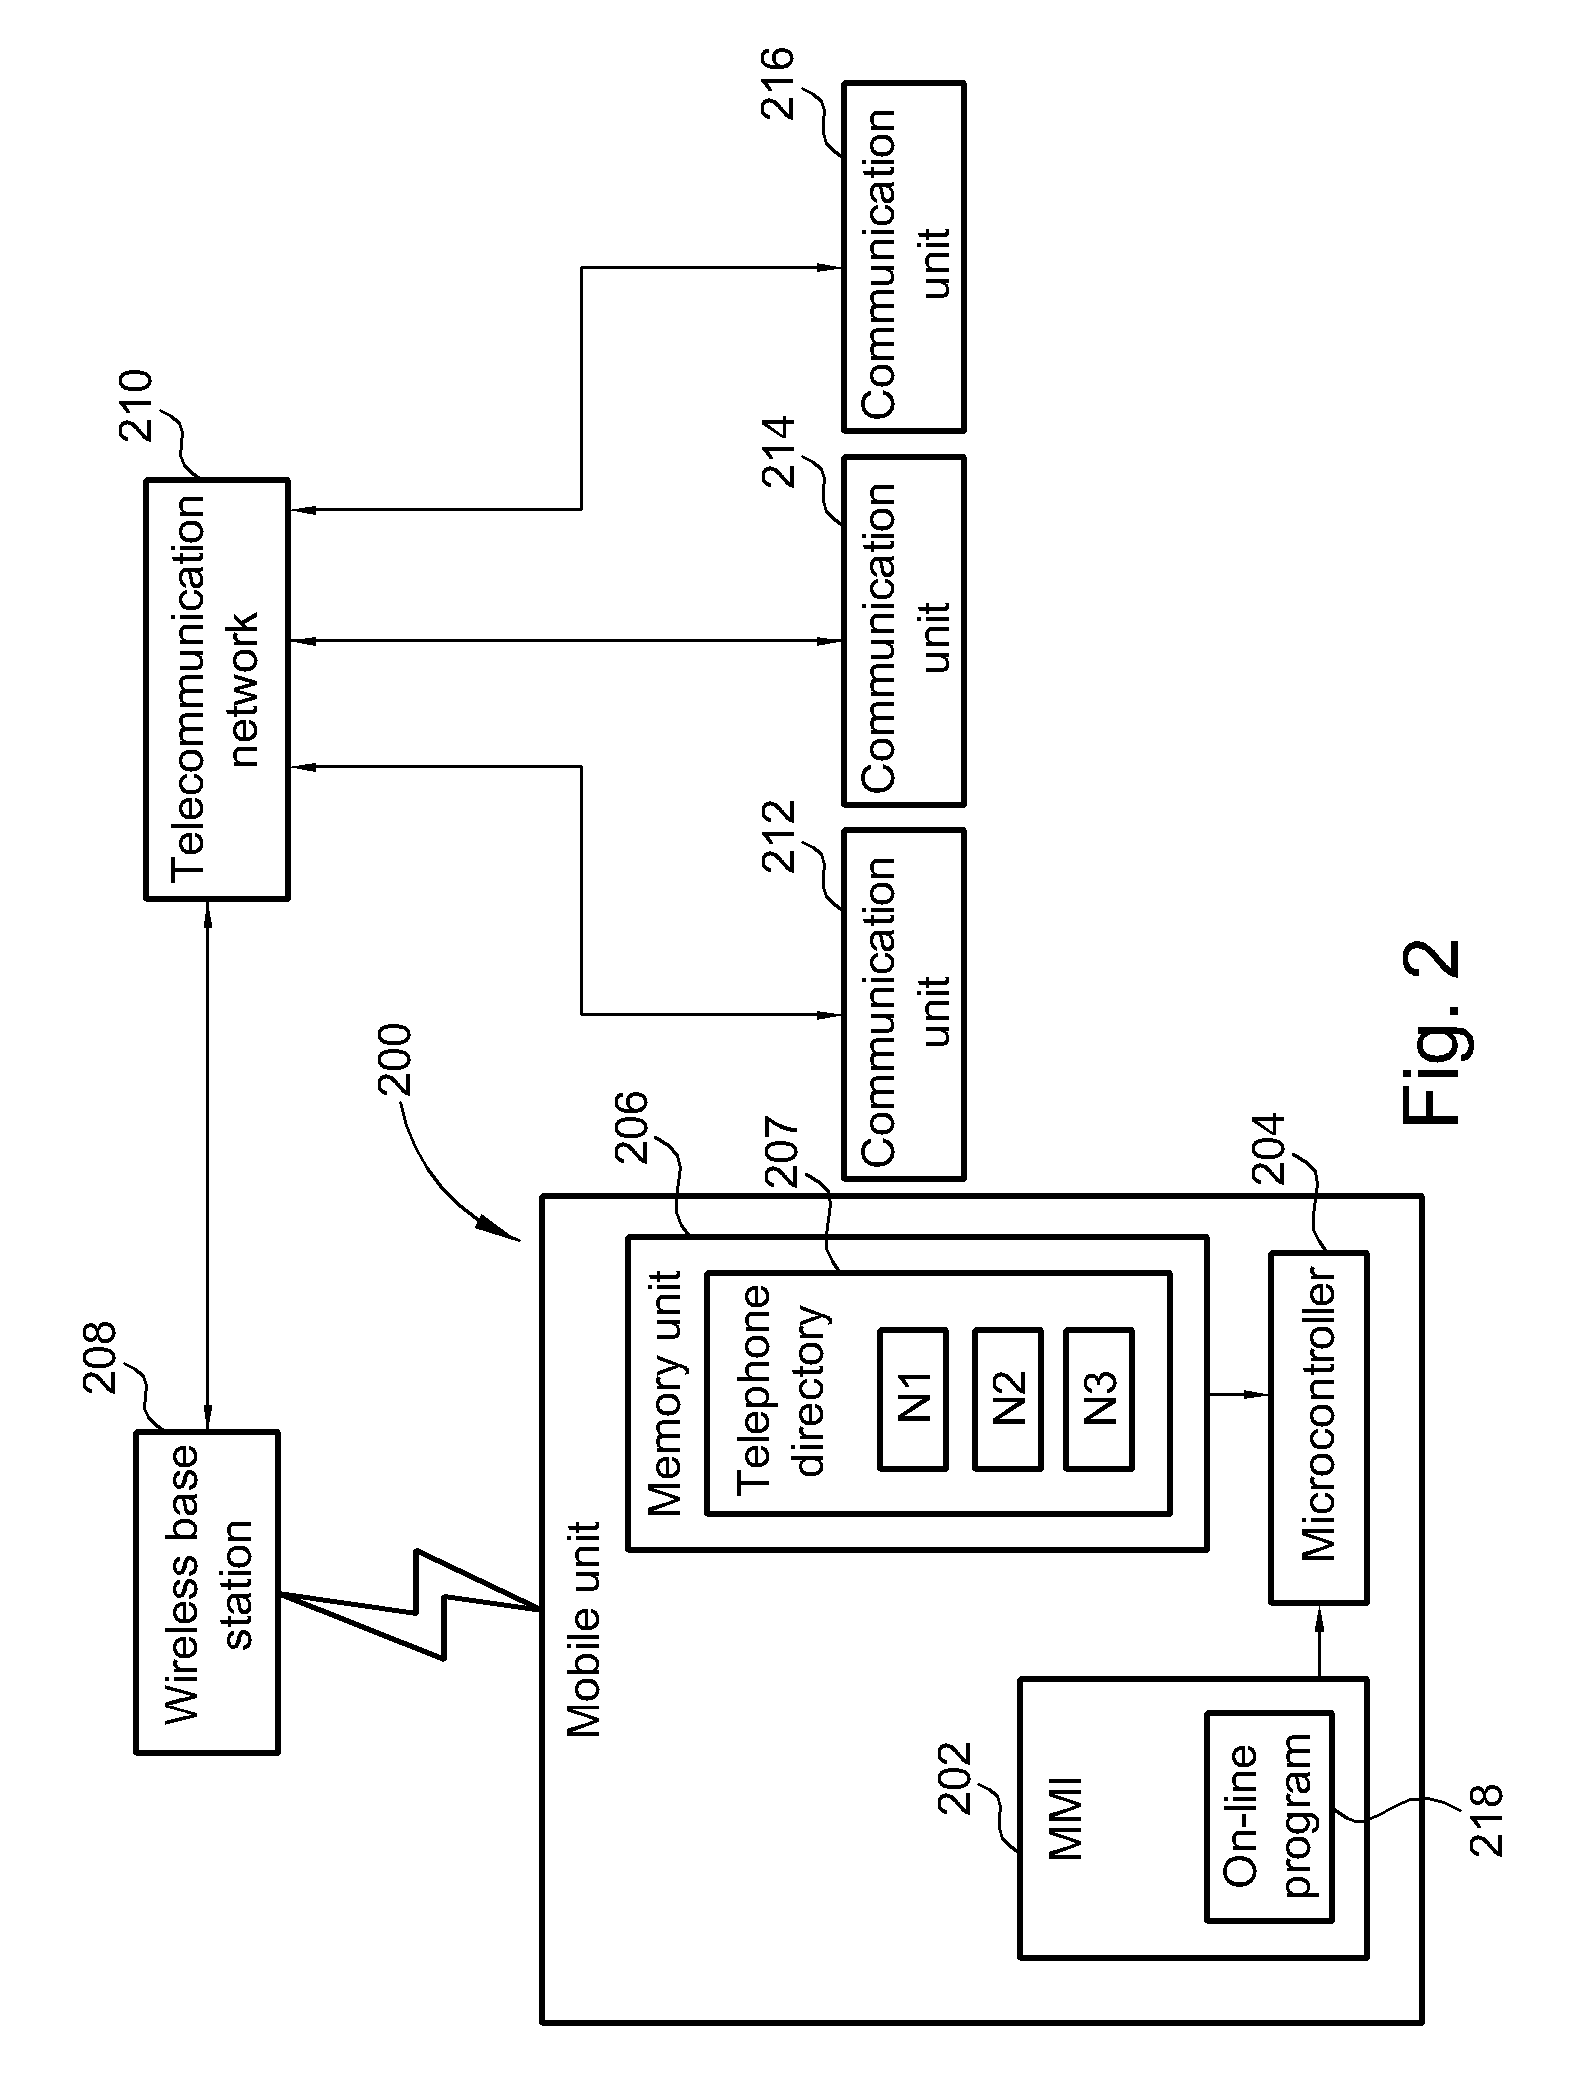 Mobile unit and method for efficiently establishing a multi-party call